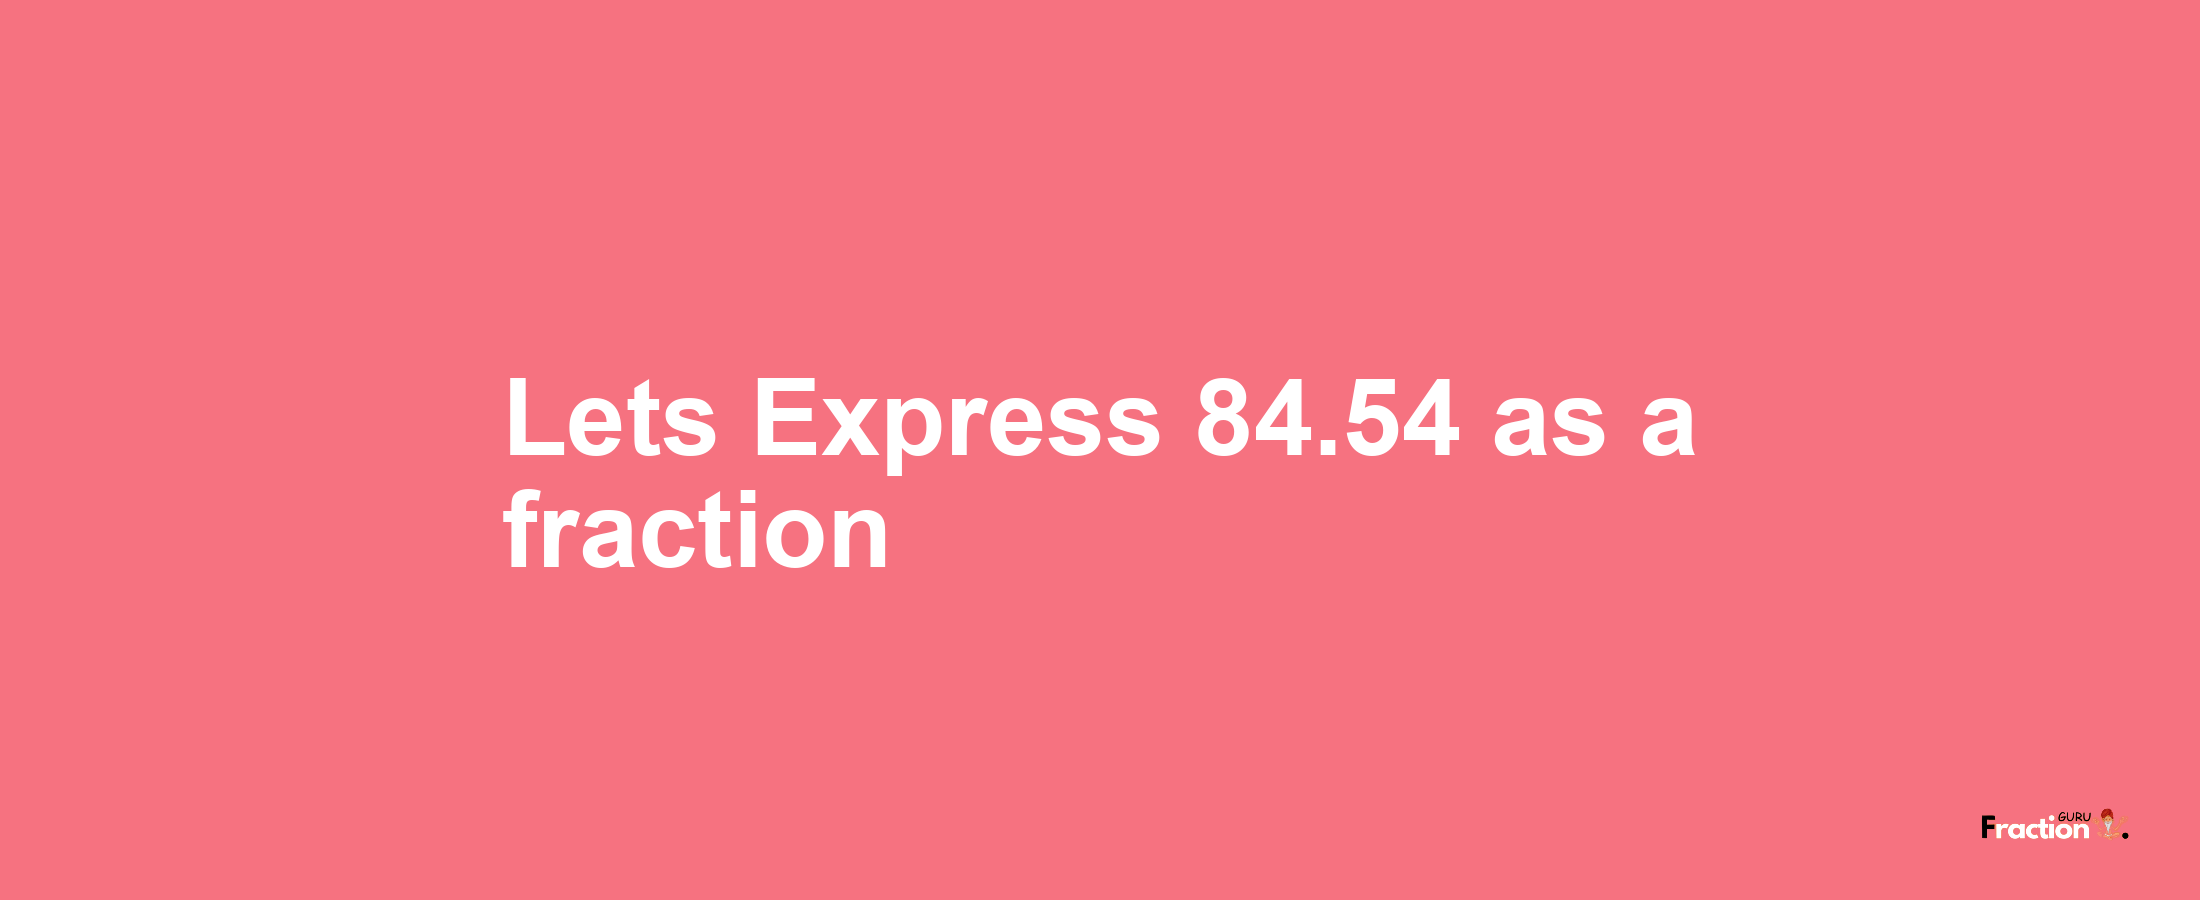 Lets Express 84.54 as afraction